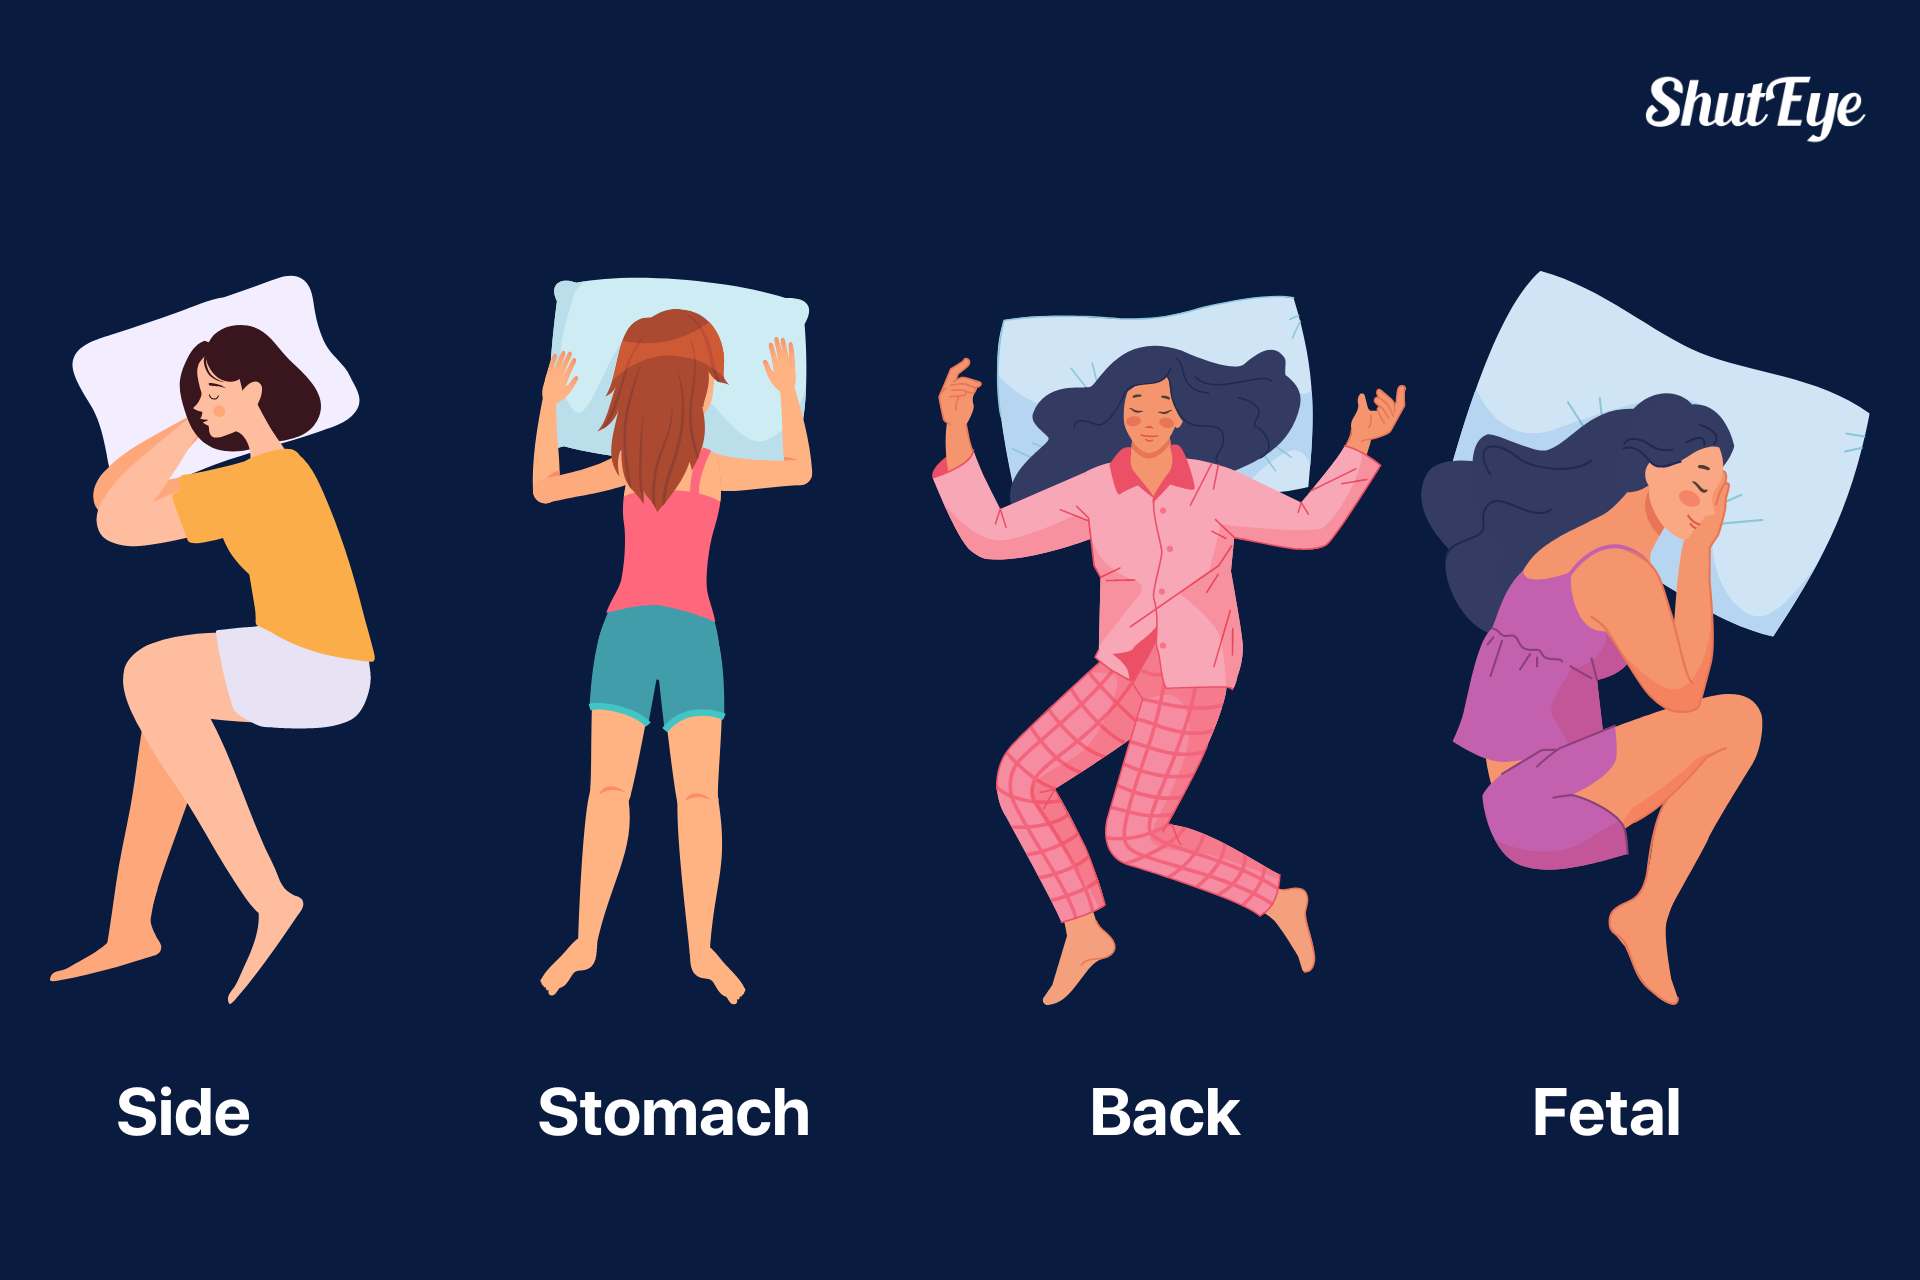 What Is The Best Sleeping Position For Your Health Shuteye